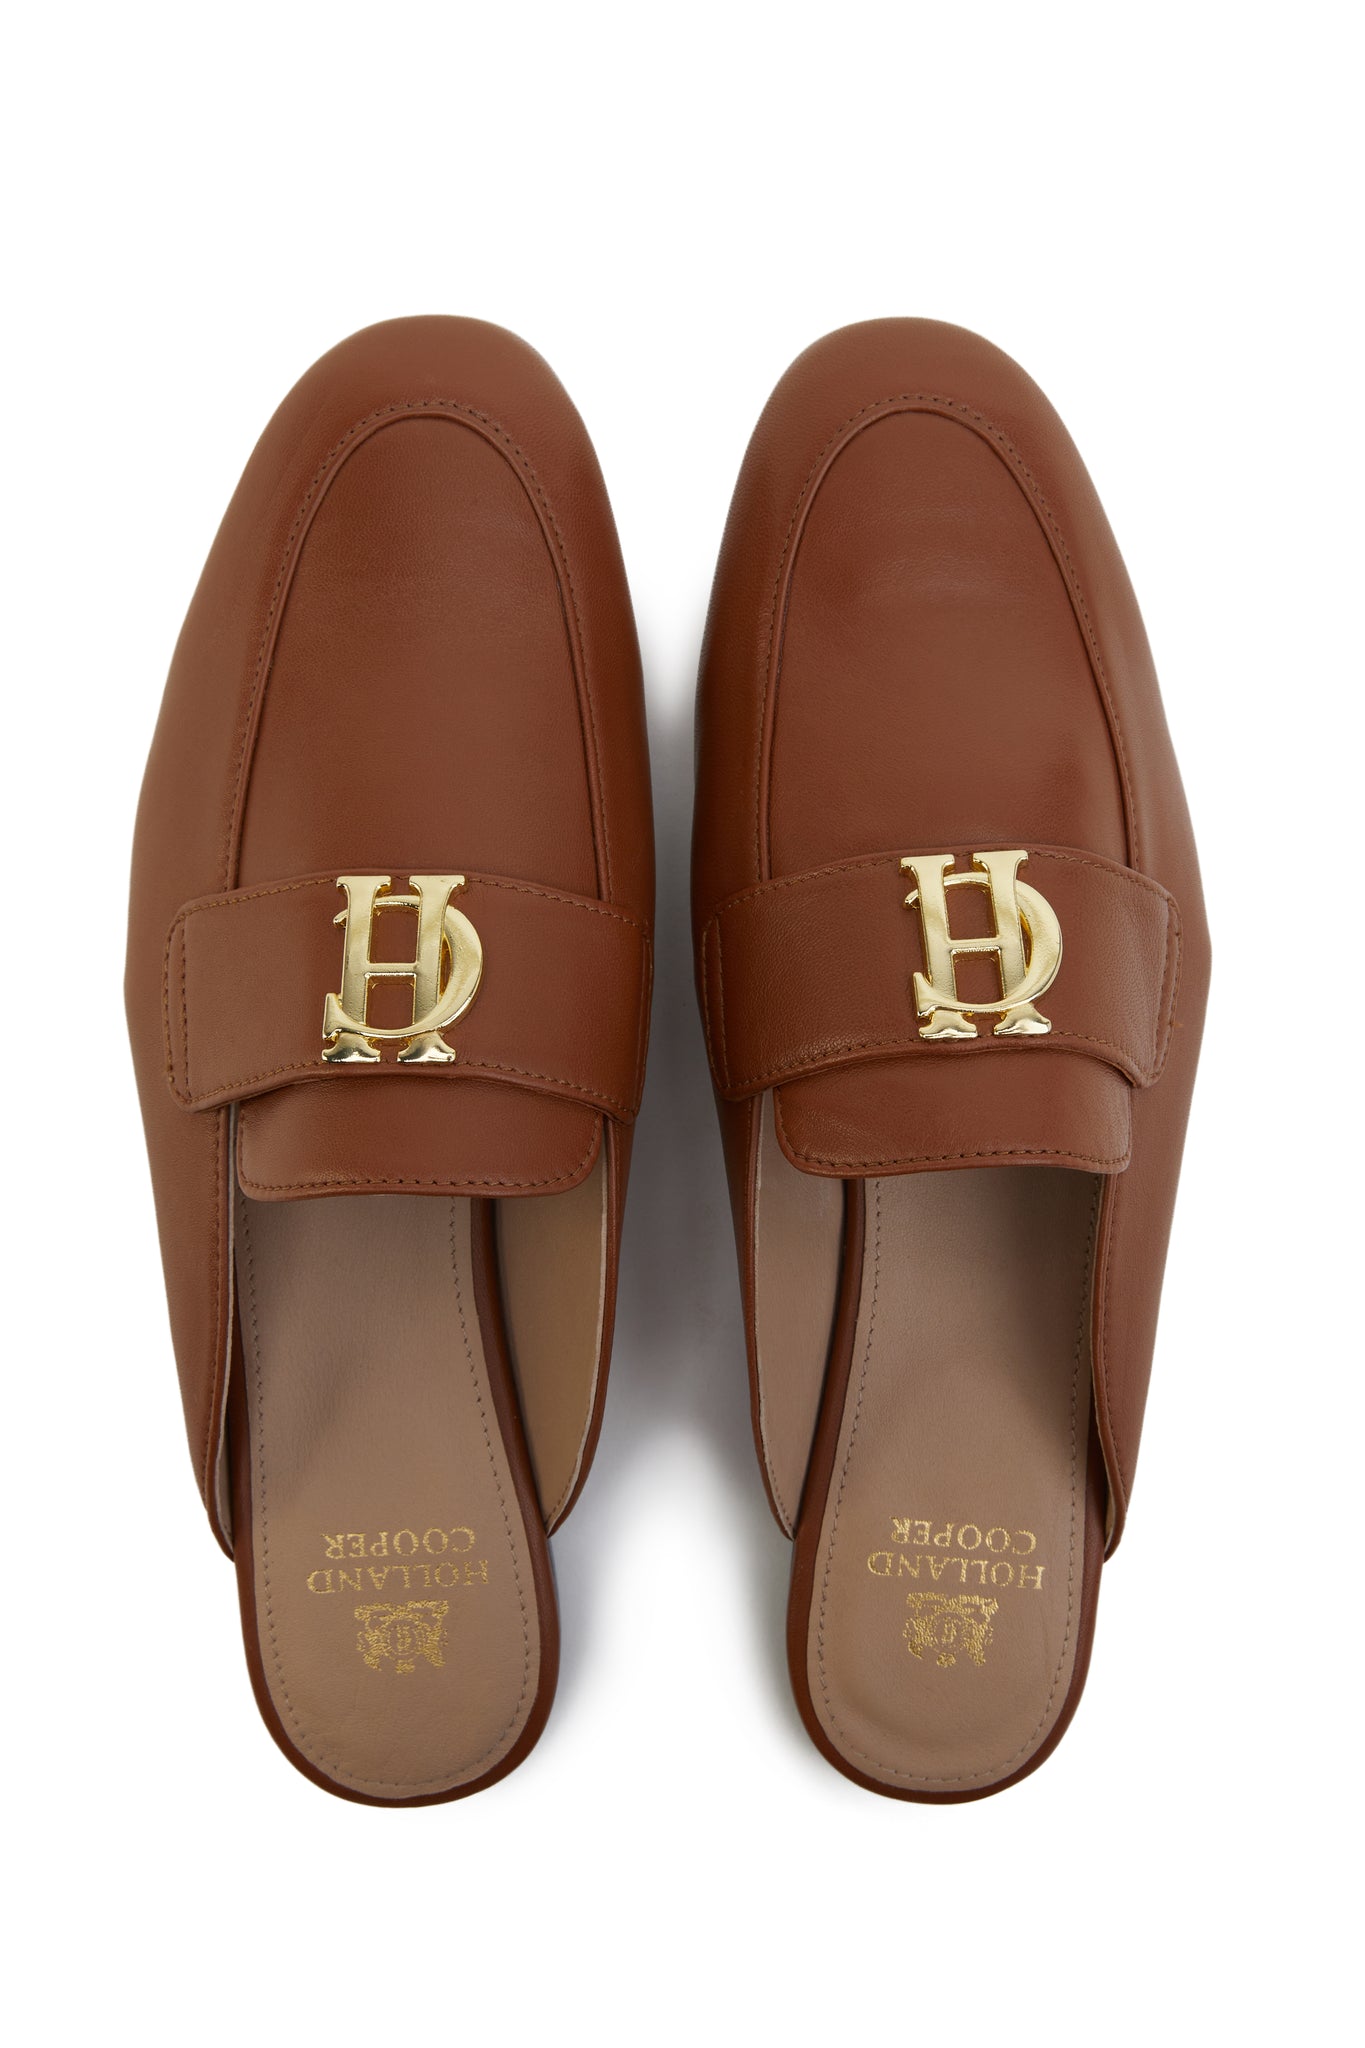 Birds eye view of tan leather backless loafers with a slightly pointed toe and gold hardware to the top and gold foil branding to inner sole